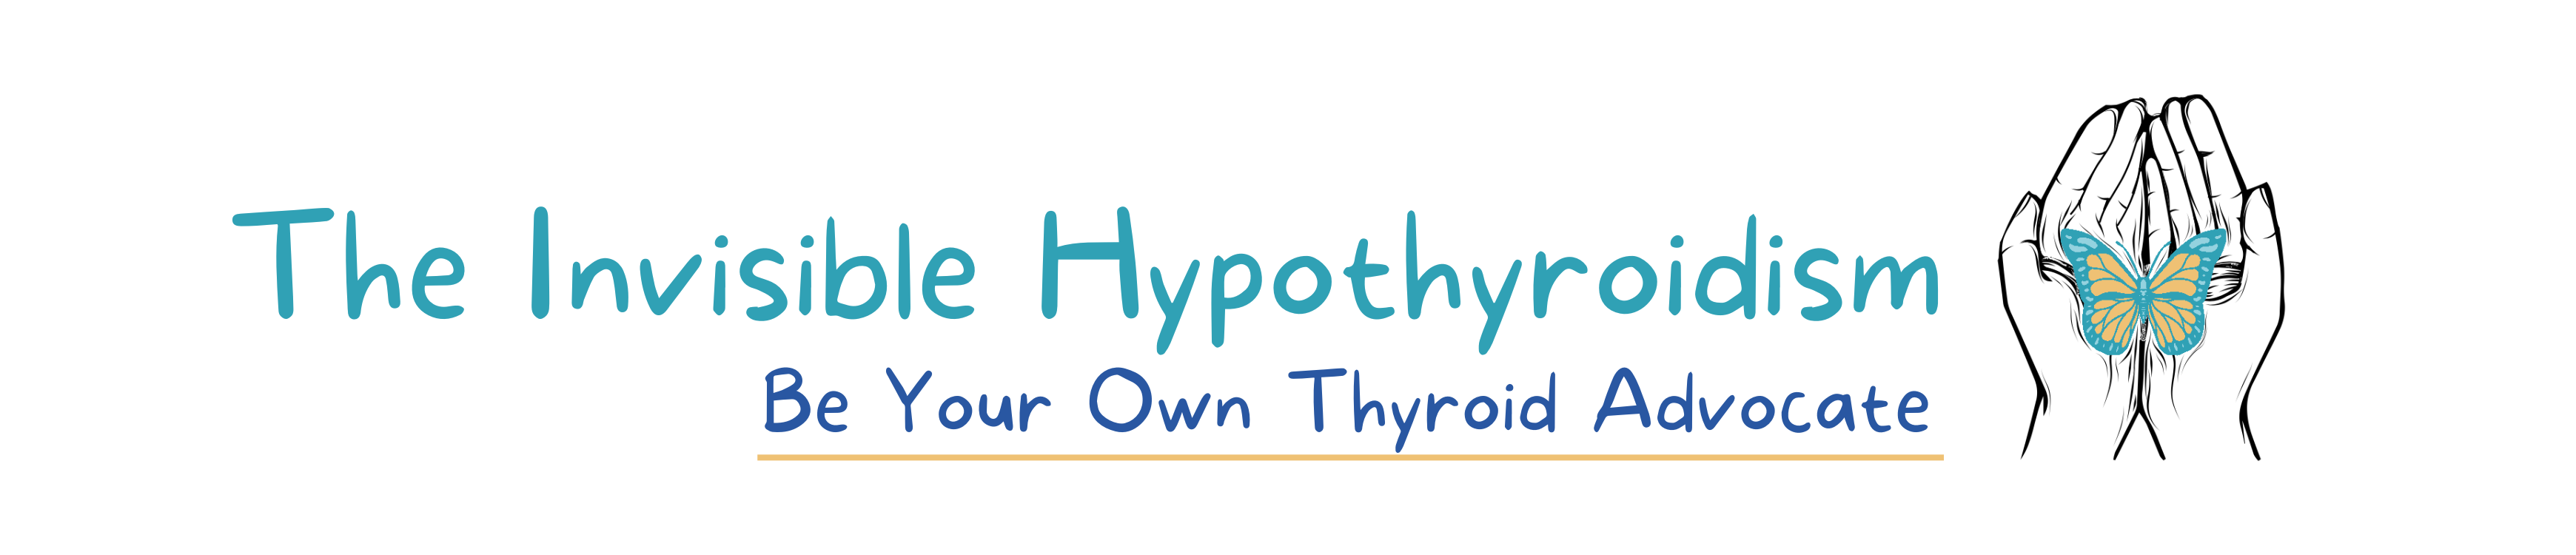 The Invisible Hypothyroidism